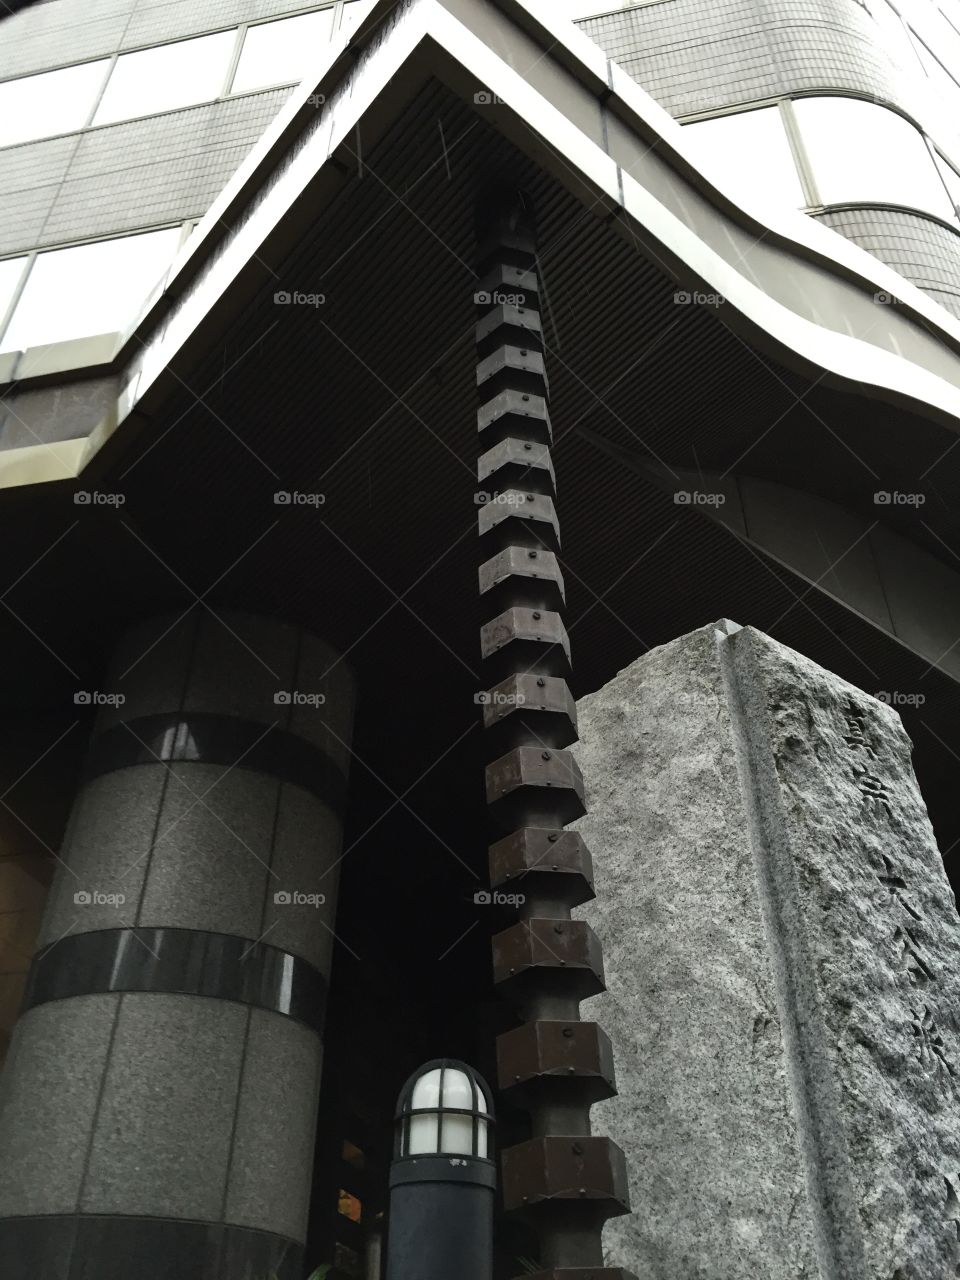 Rain gutter in Tokyo, Japan. Rain gutters are designed to trickle down each level.